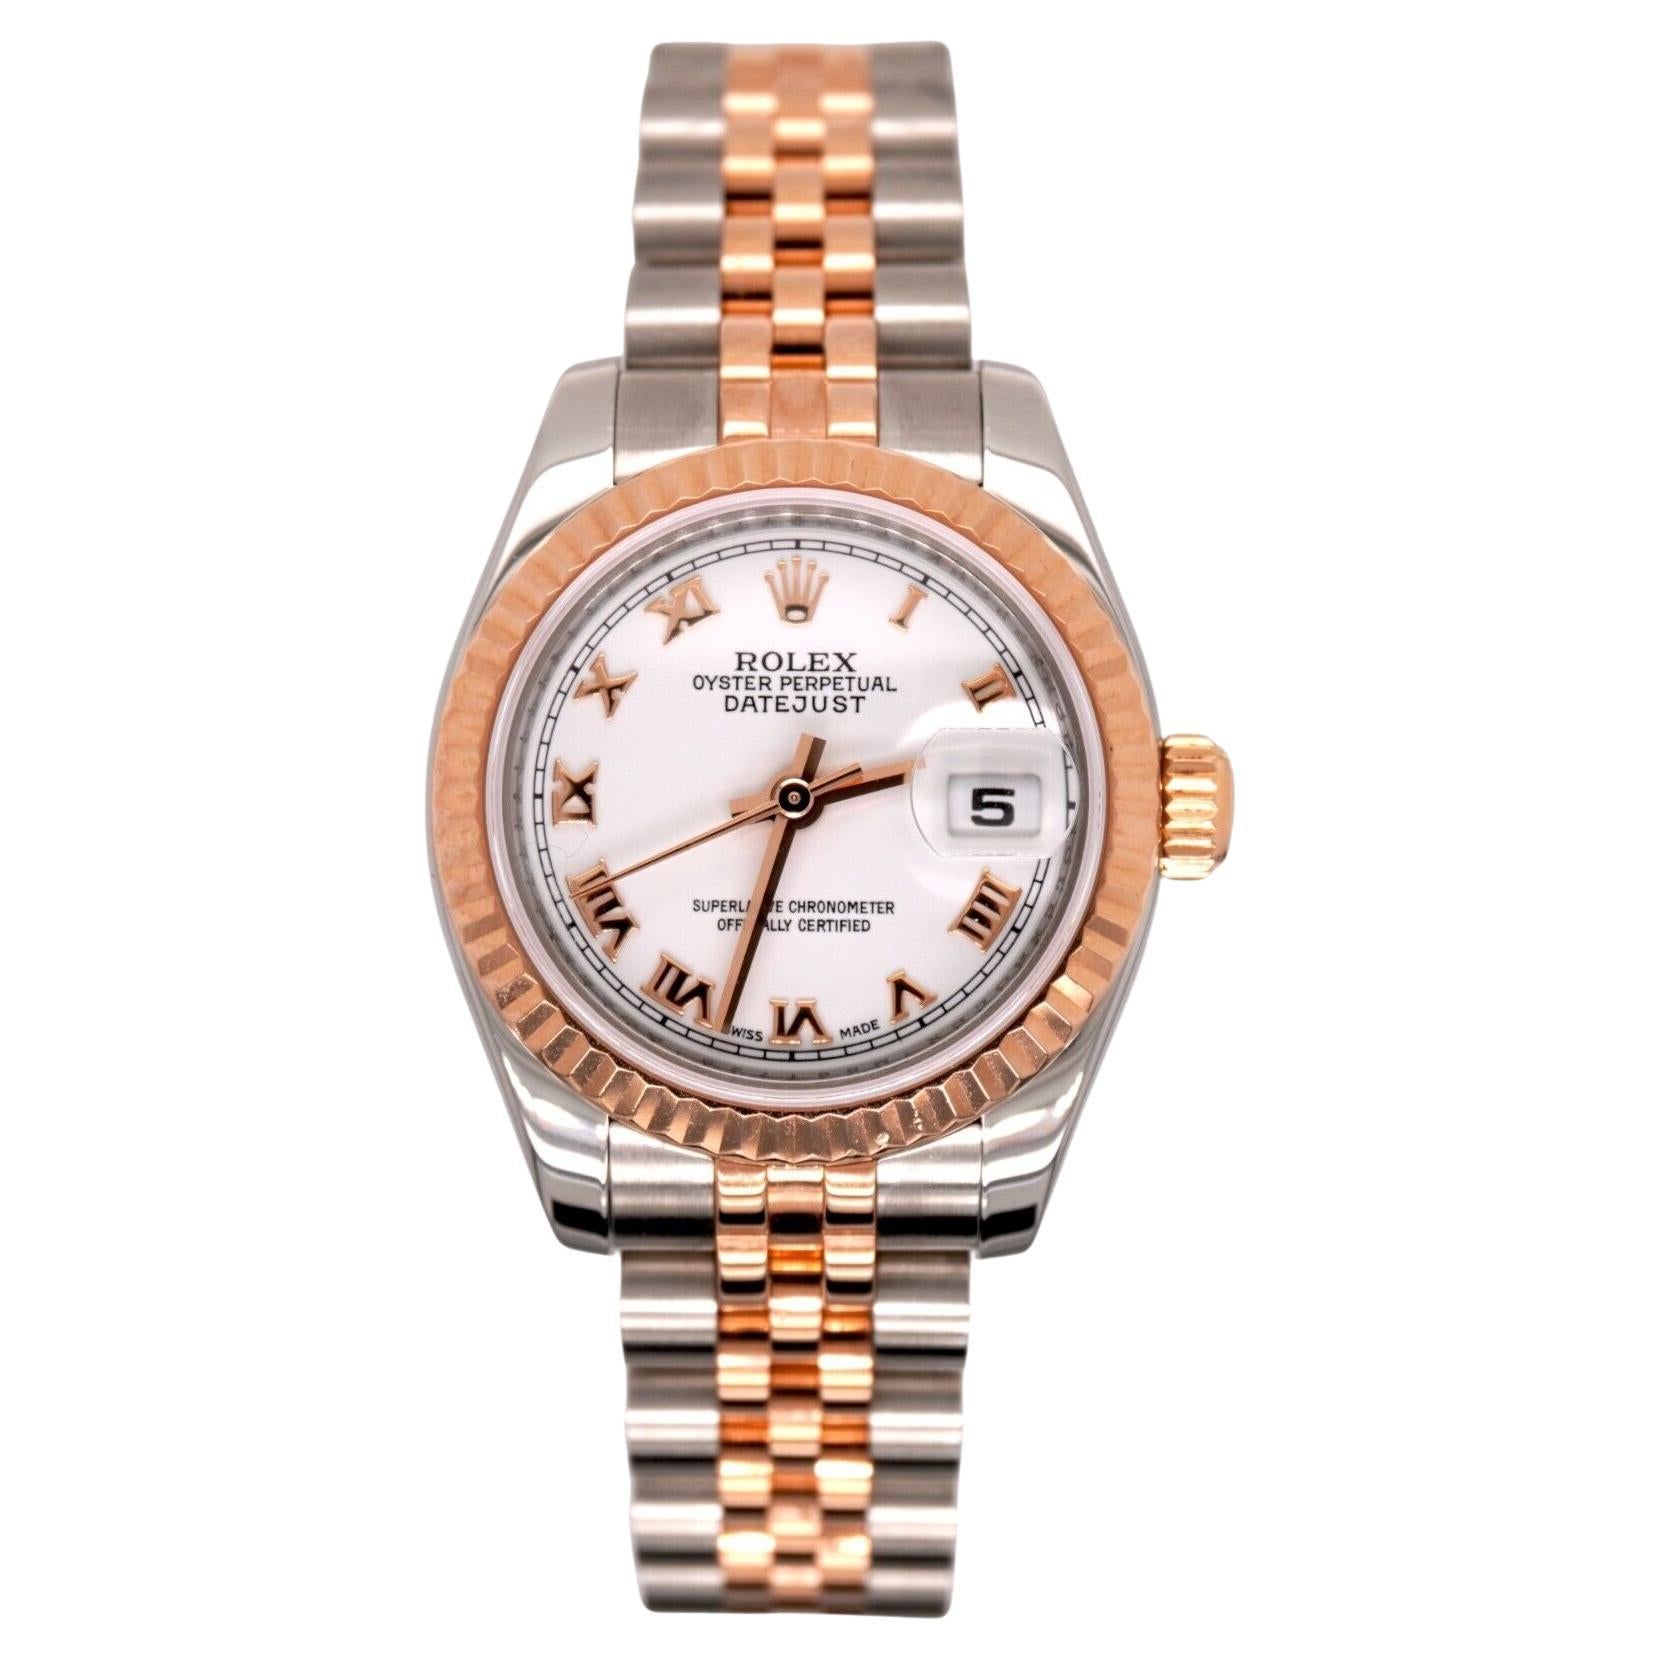 Rolex Datejust 26mm 18k Rose Gold & Steel Fluted Jubilee White Dial Watch 179171 For Sale